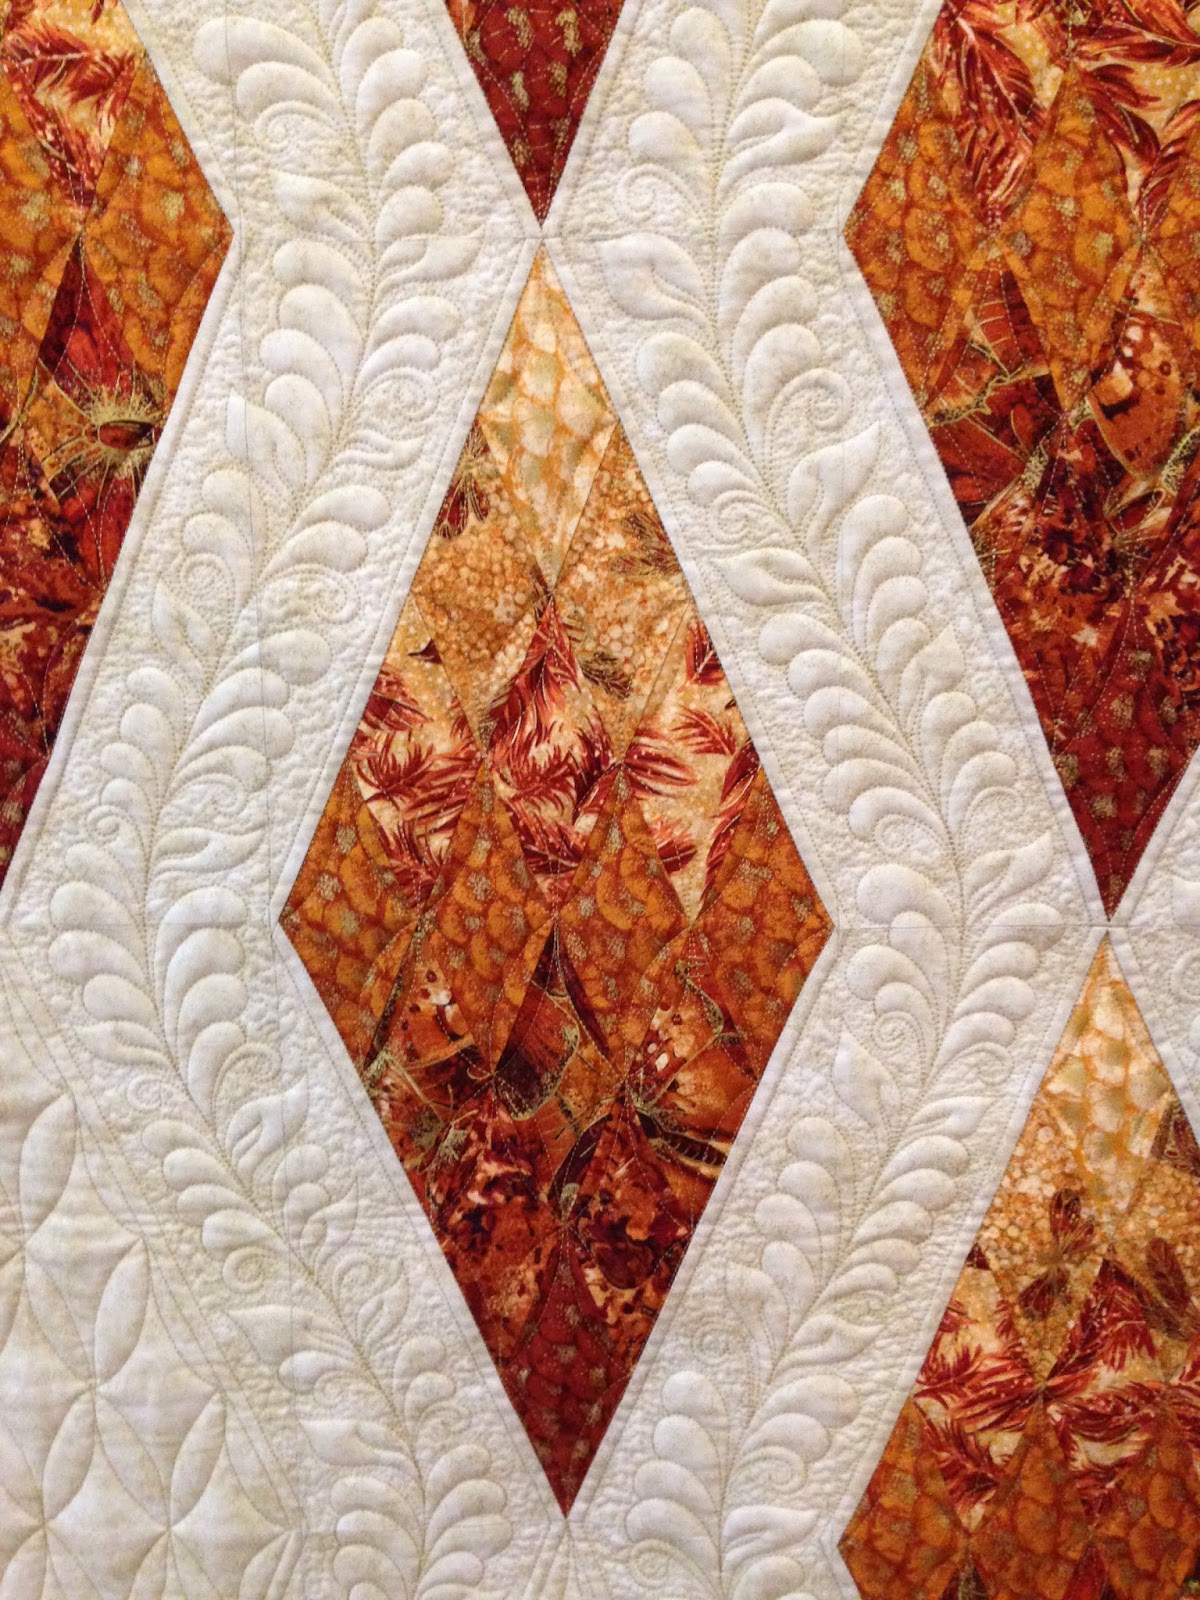 Sew'n Wild Oaks Quilting Blog: Morning Quilt Show